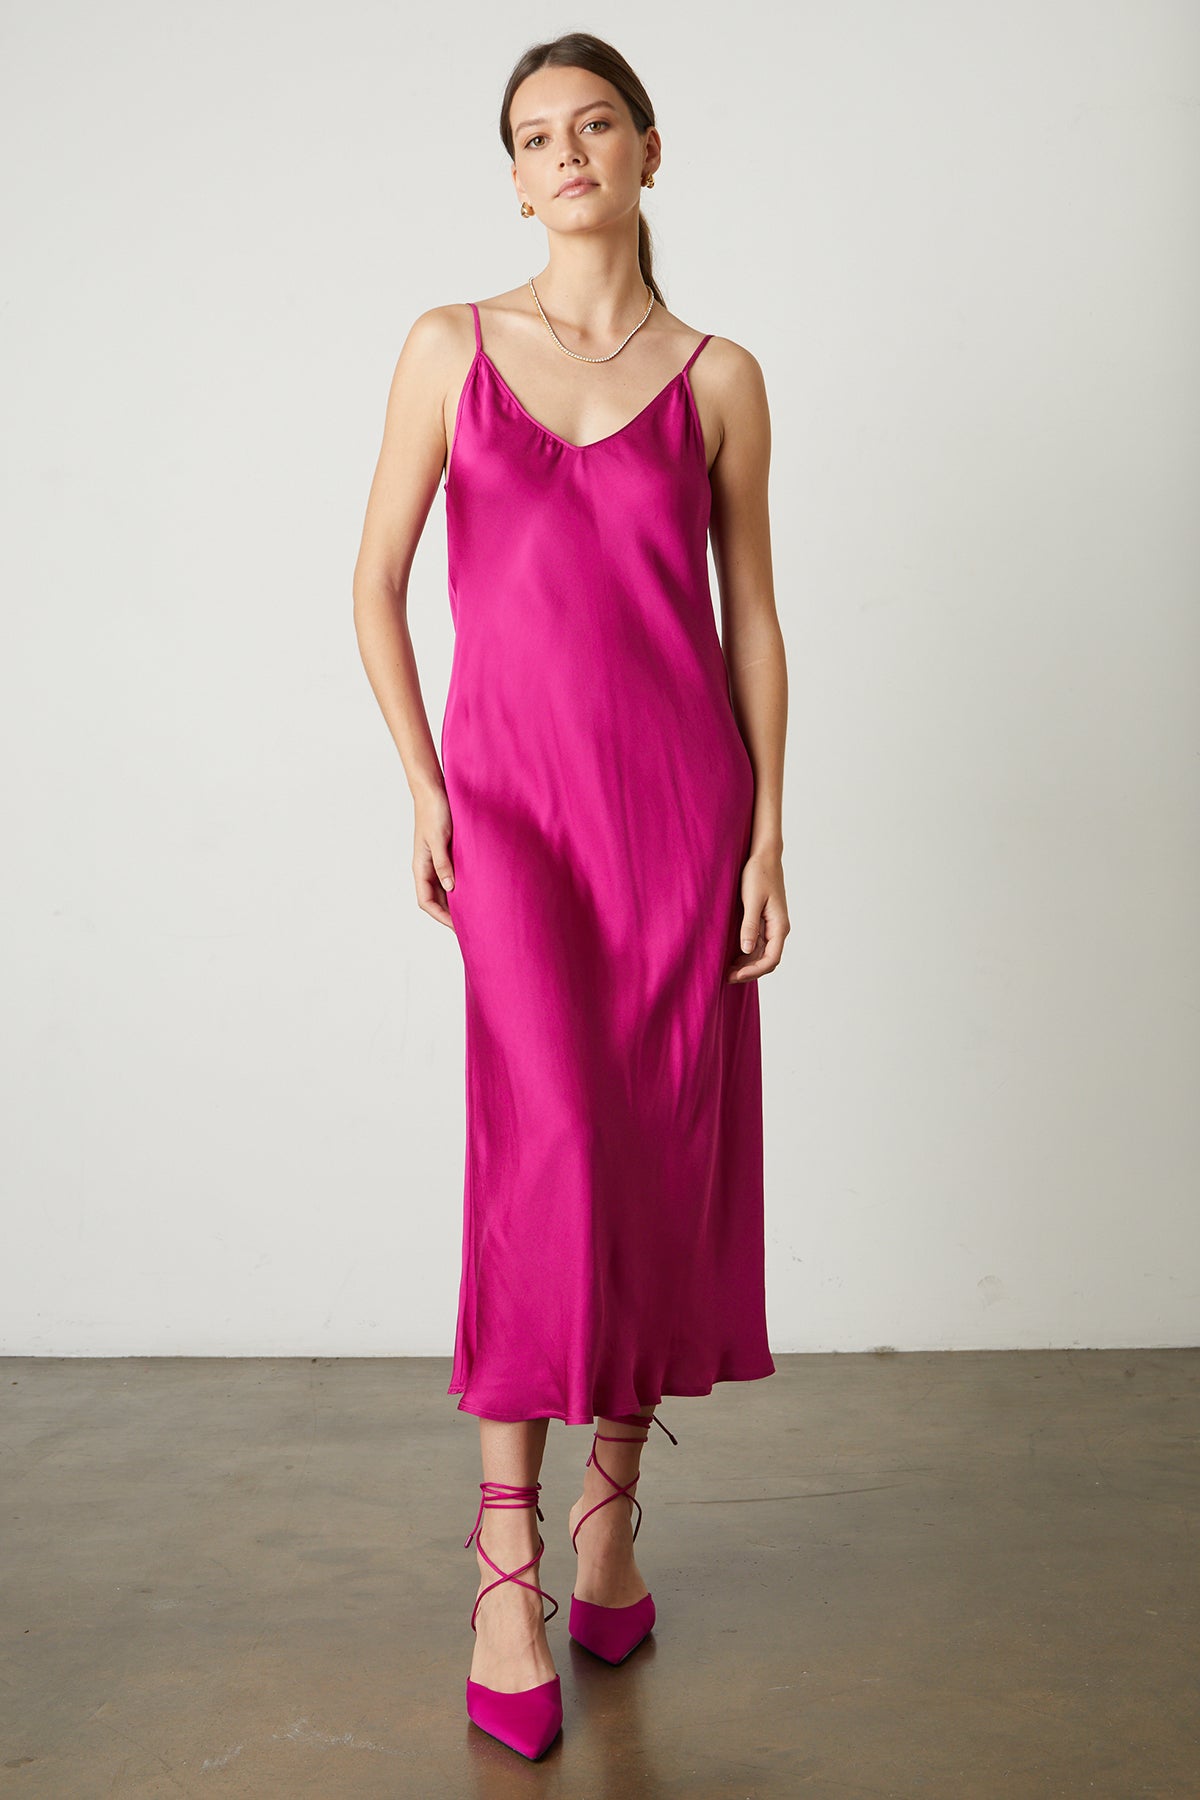 Poppy Satin Slip Dress in bright raspberry pink with matching heels front-25548639502529